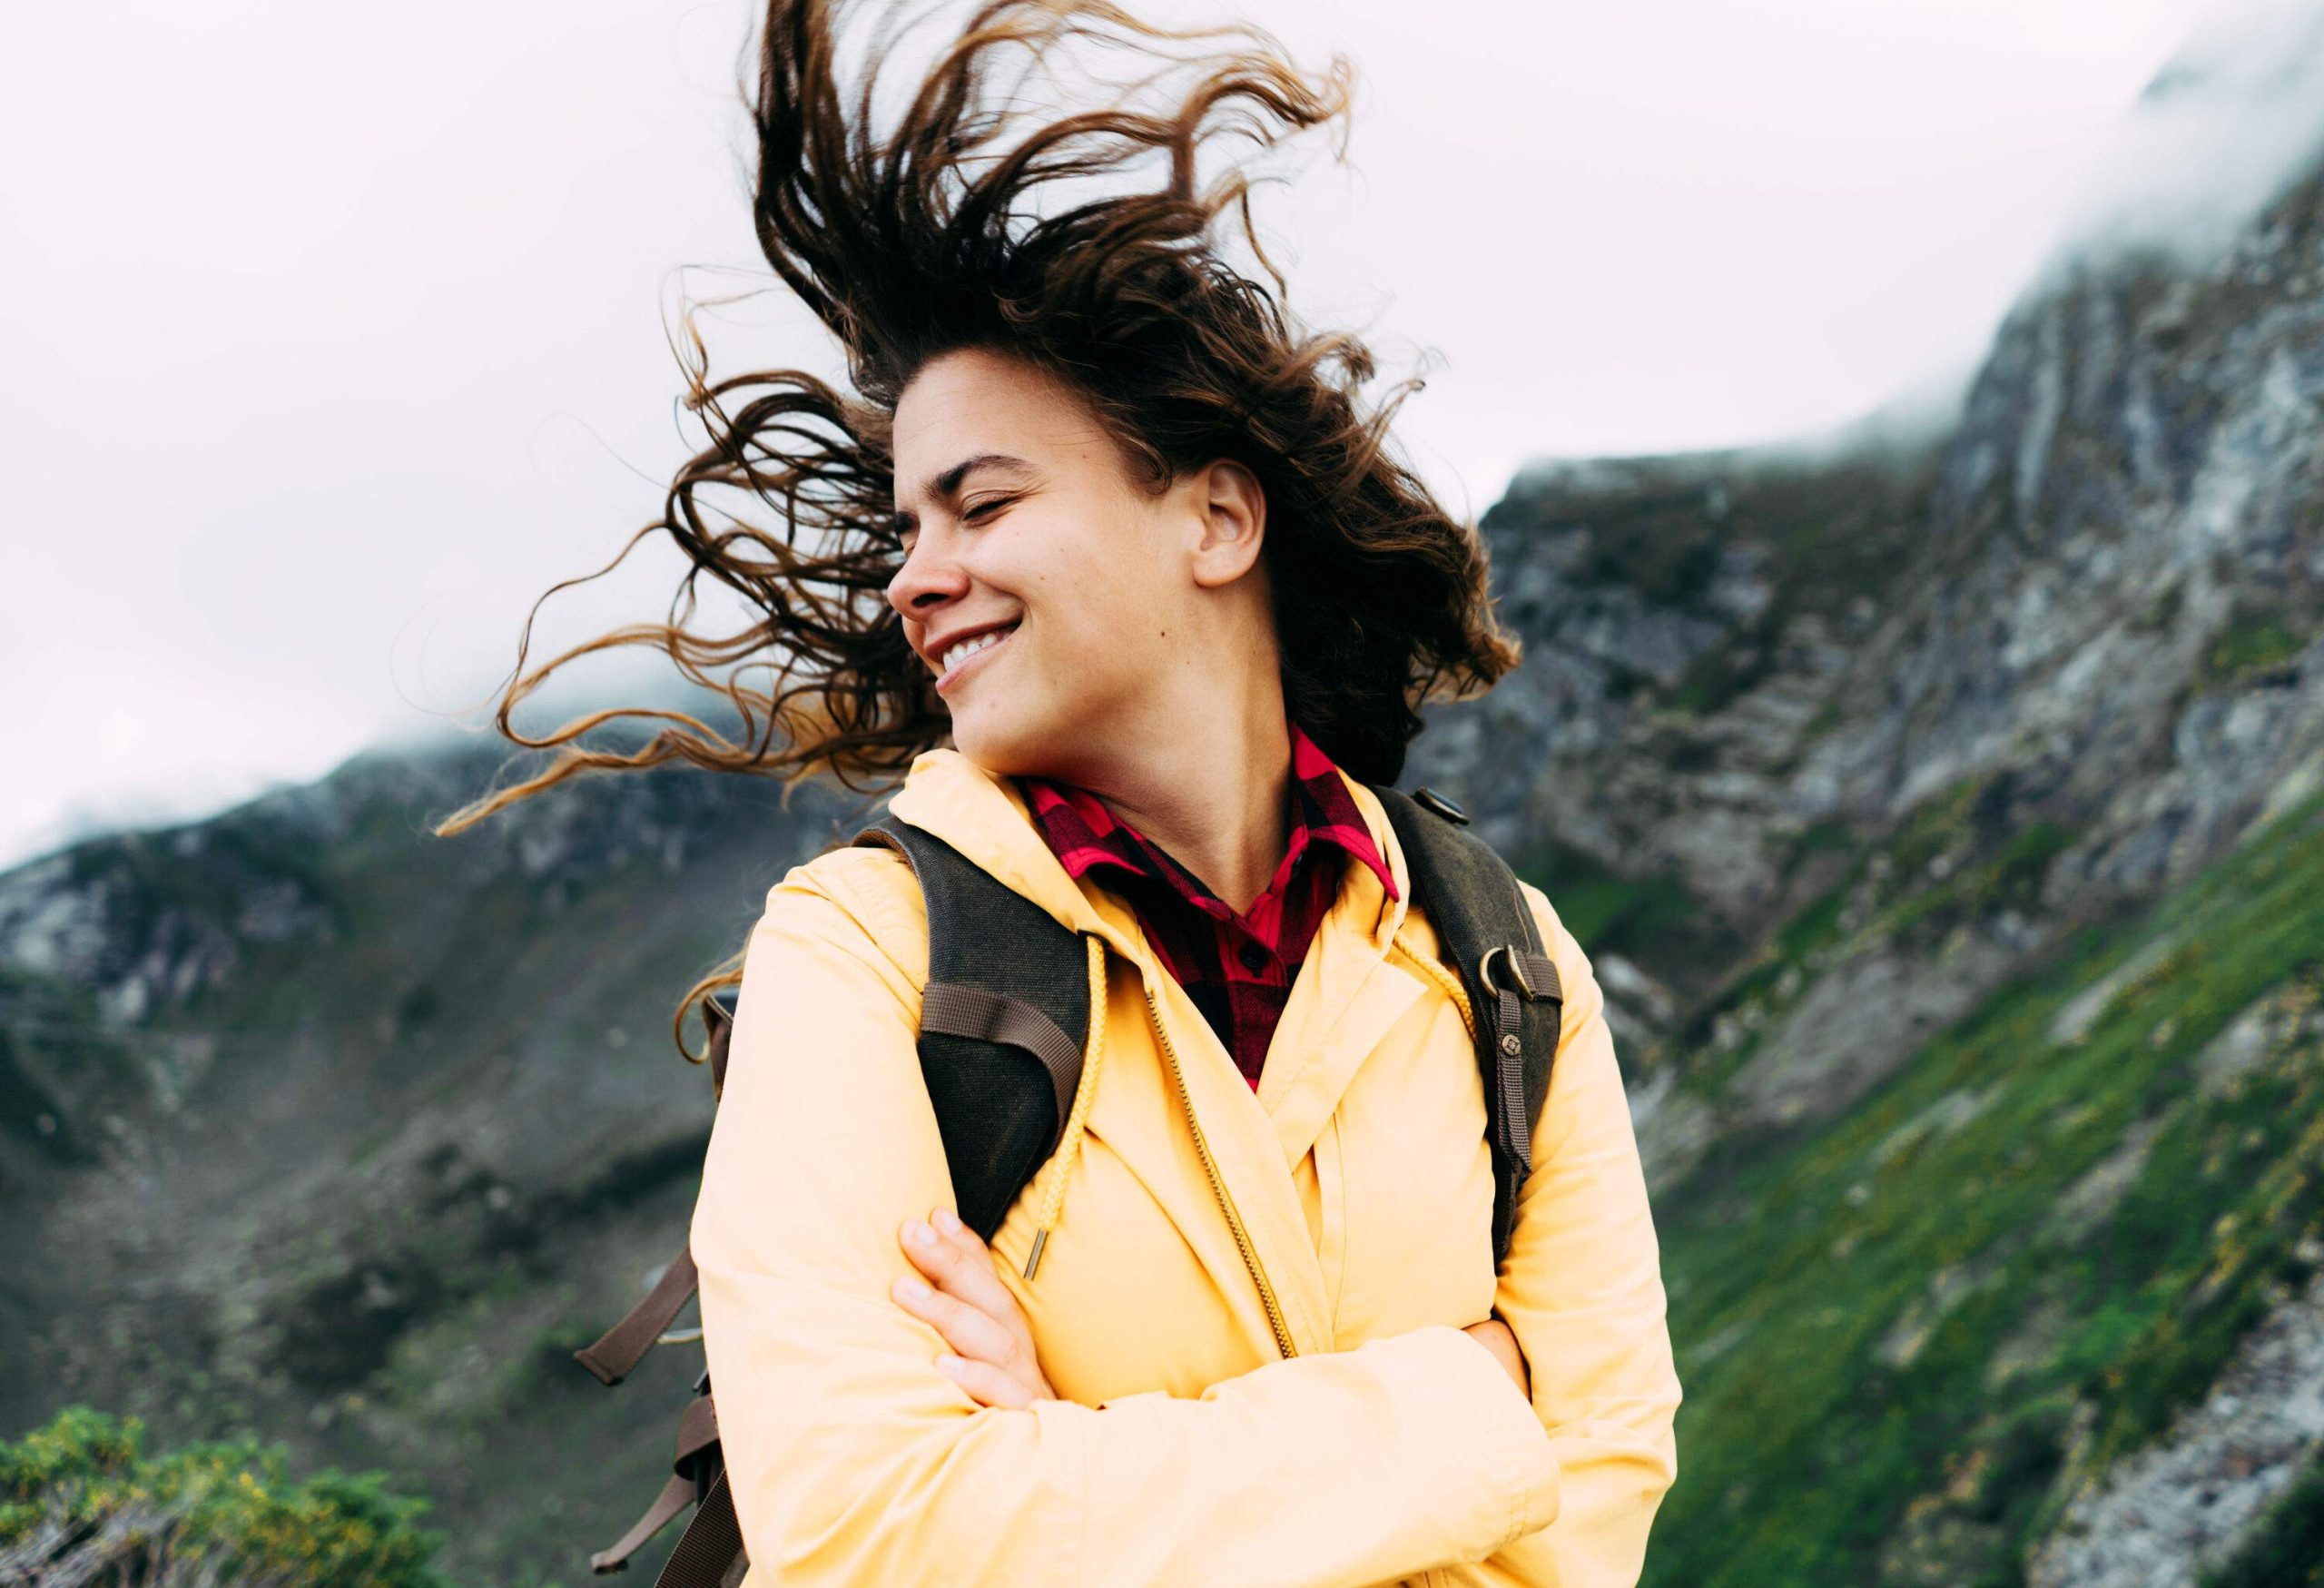 relaxed young woman twists her head and long hair blows in the wind. Close-up lifestyle portrait of a woman in a yellow raincoat in the mountains